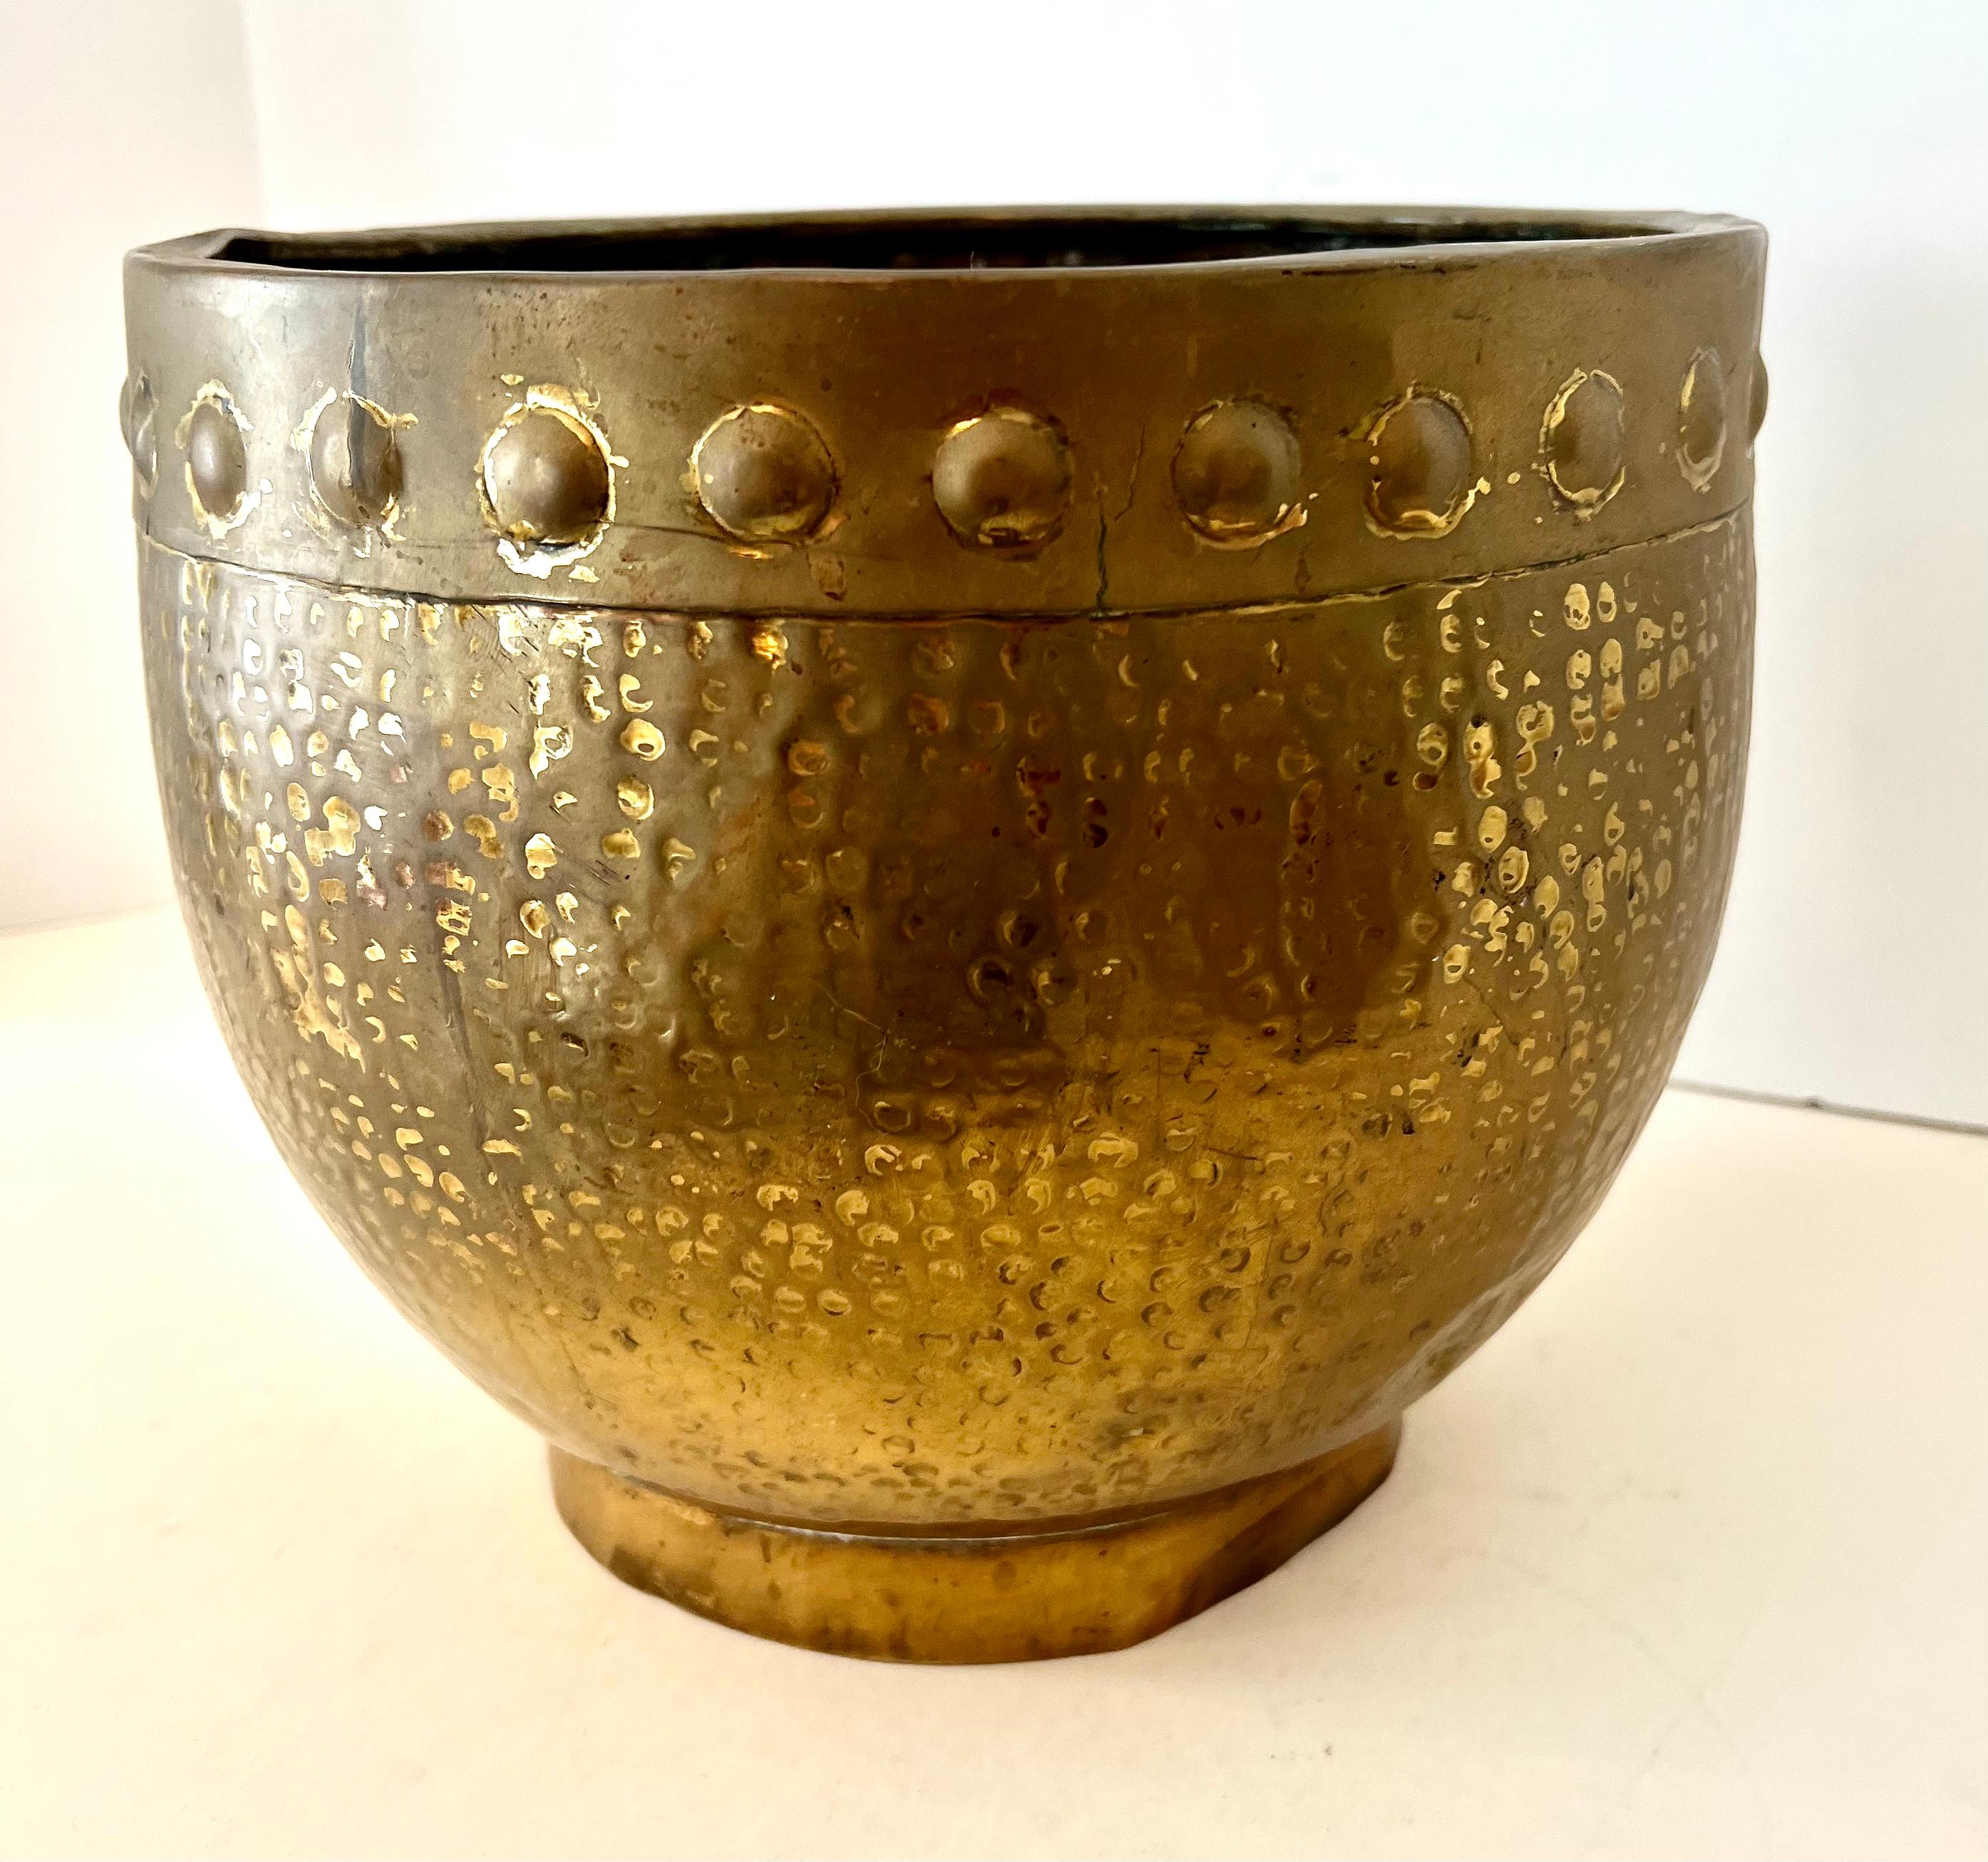 Solid Hammered Brass Cachepot Jardiniere Planter with Rim Details In Good Condition For Sale In Los Angeles, CA